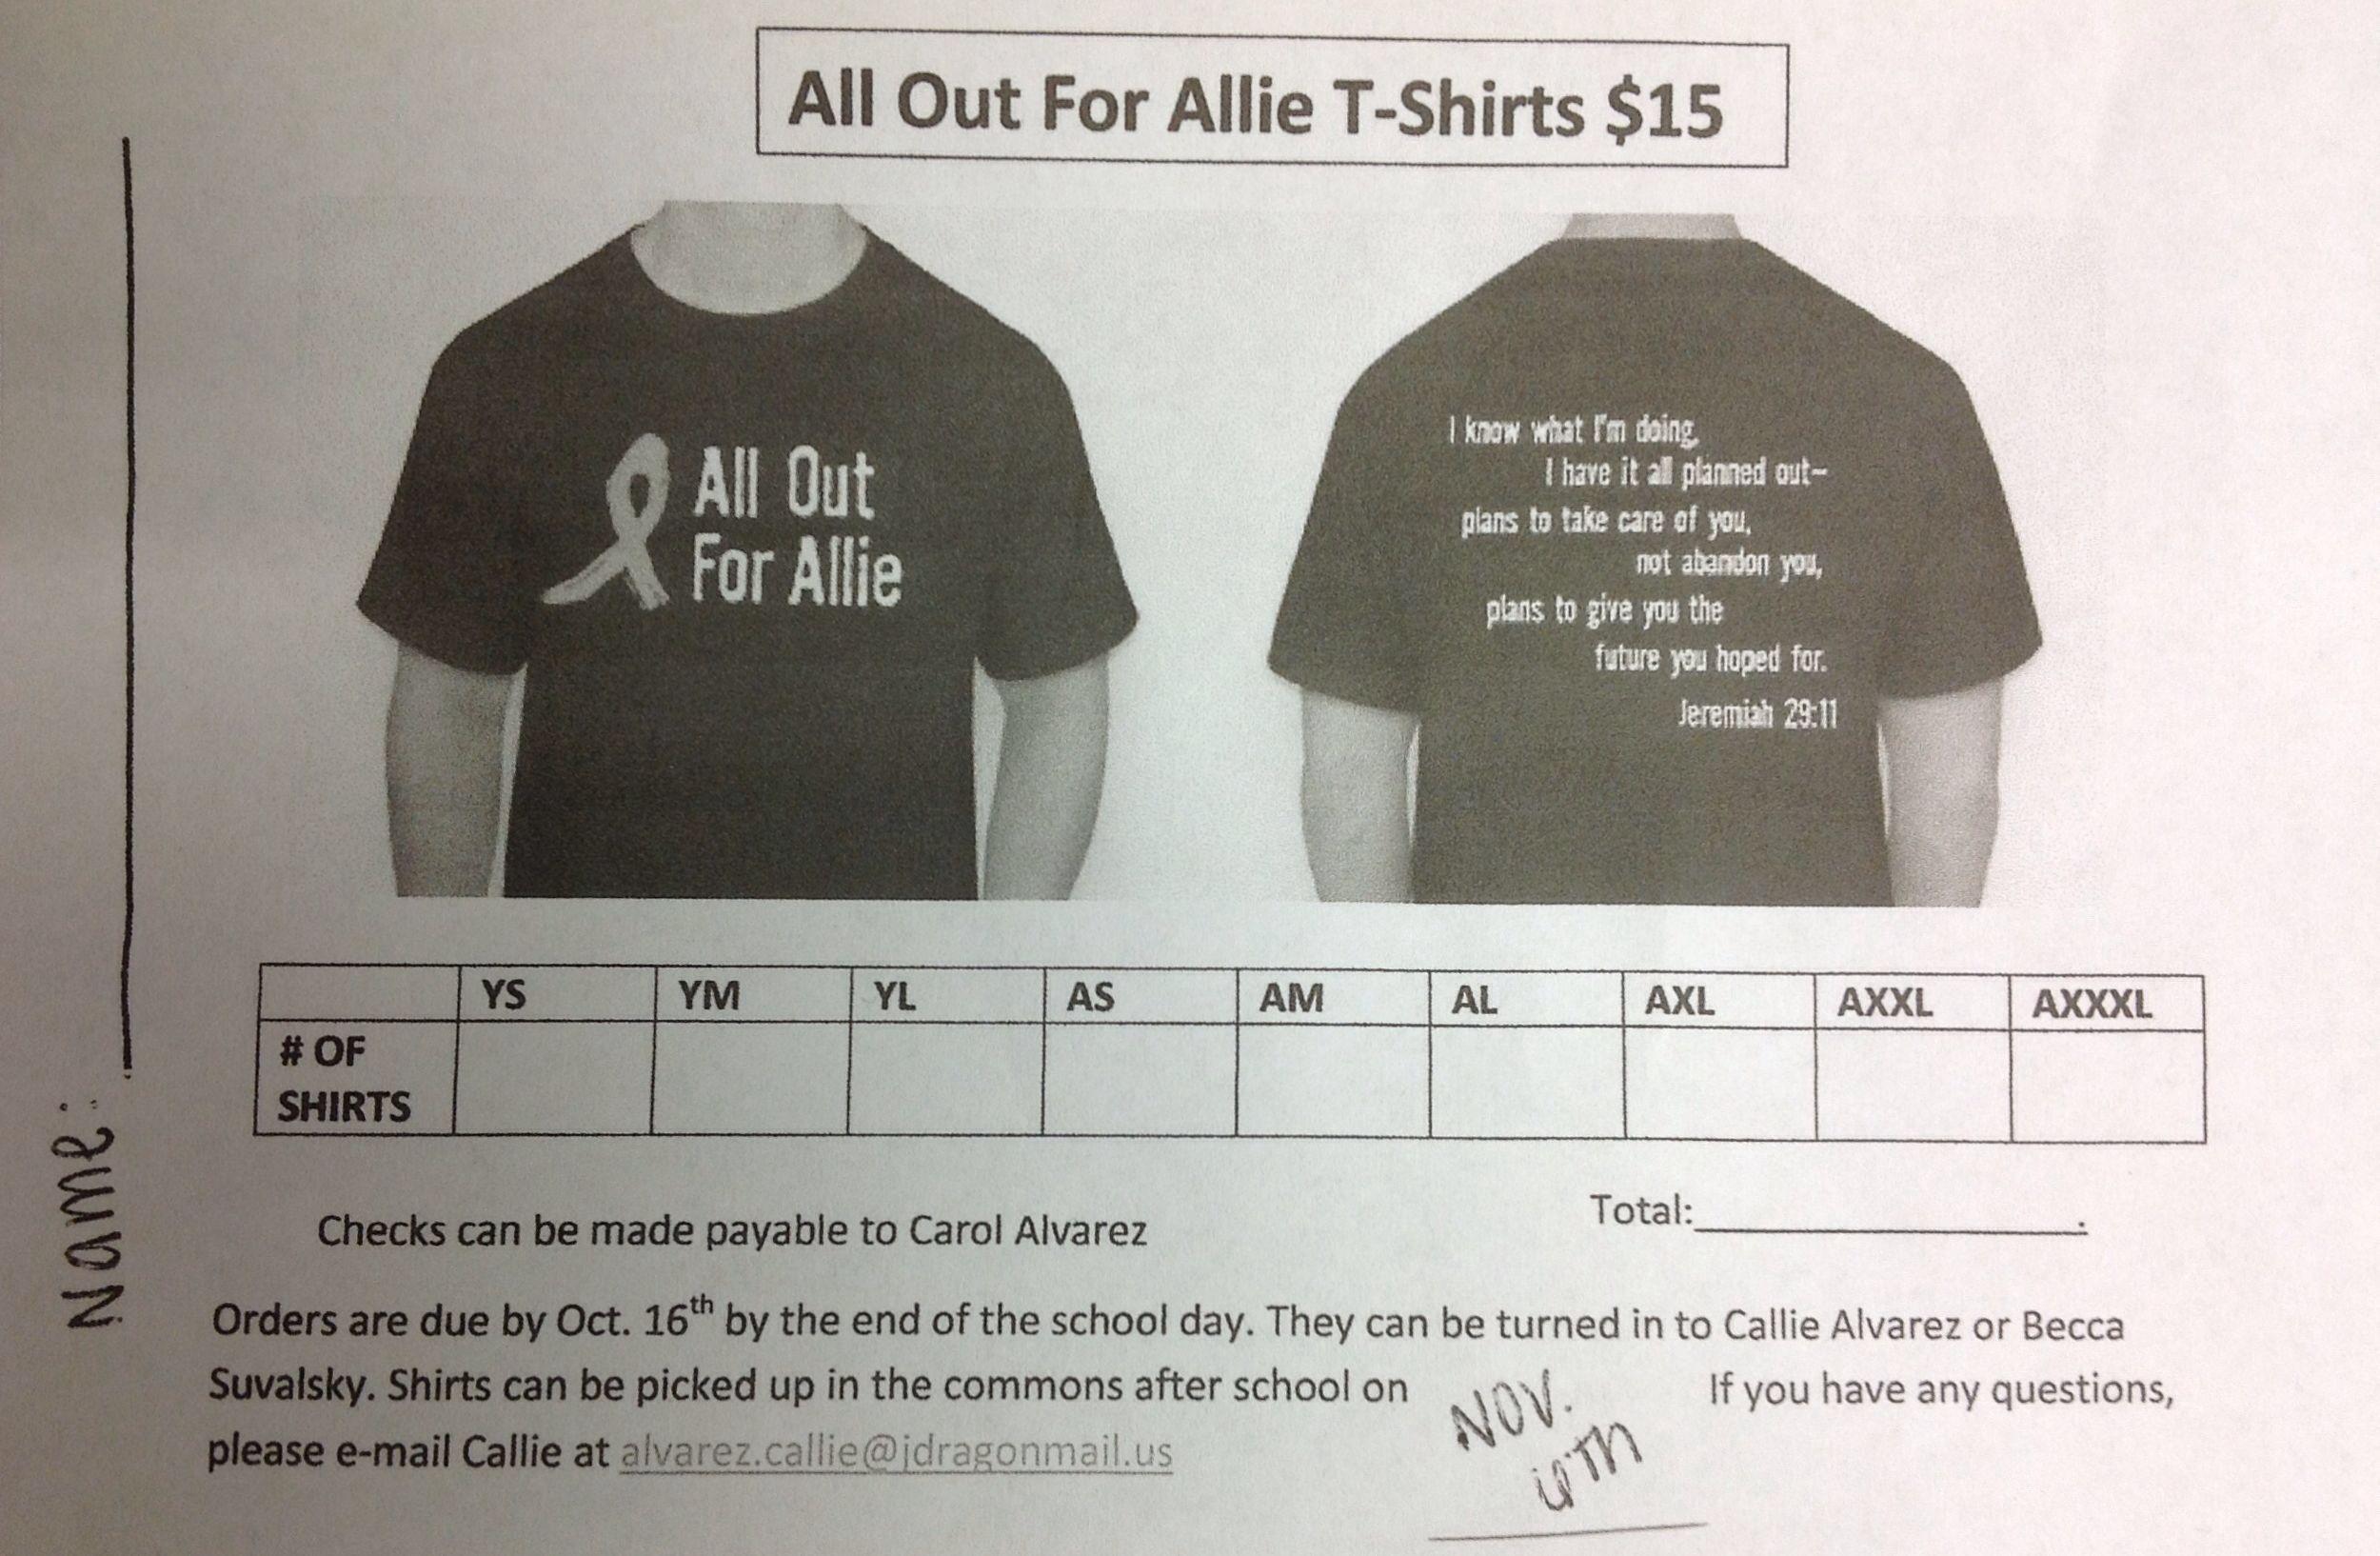 All Out For Allie T-Shirts